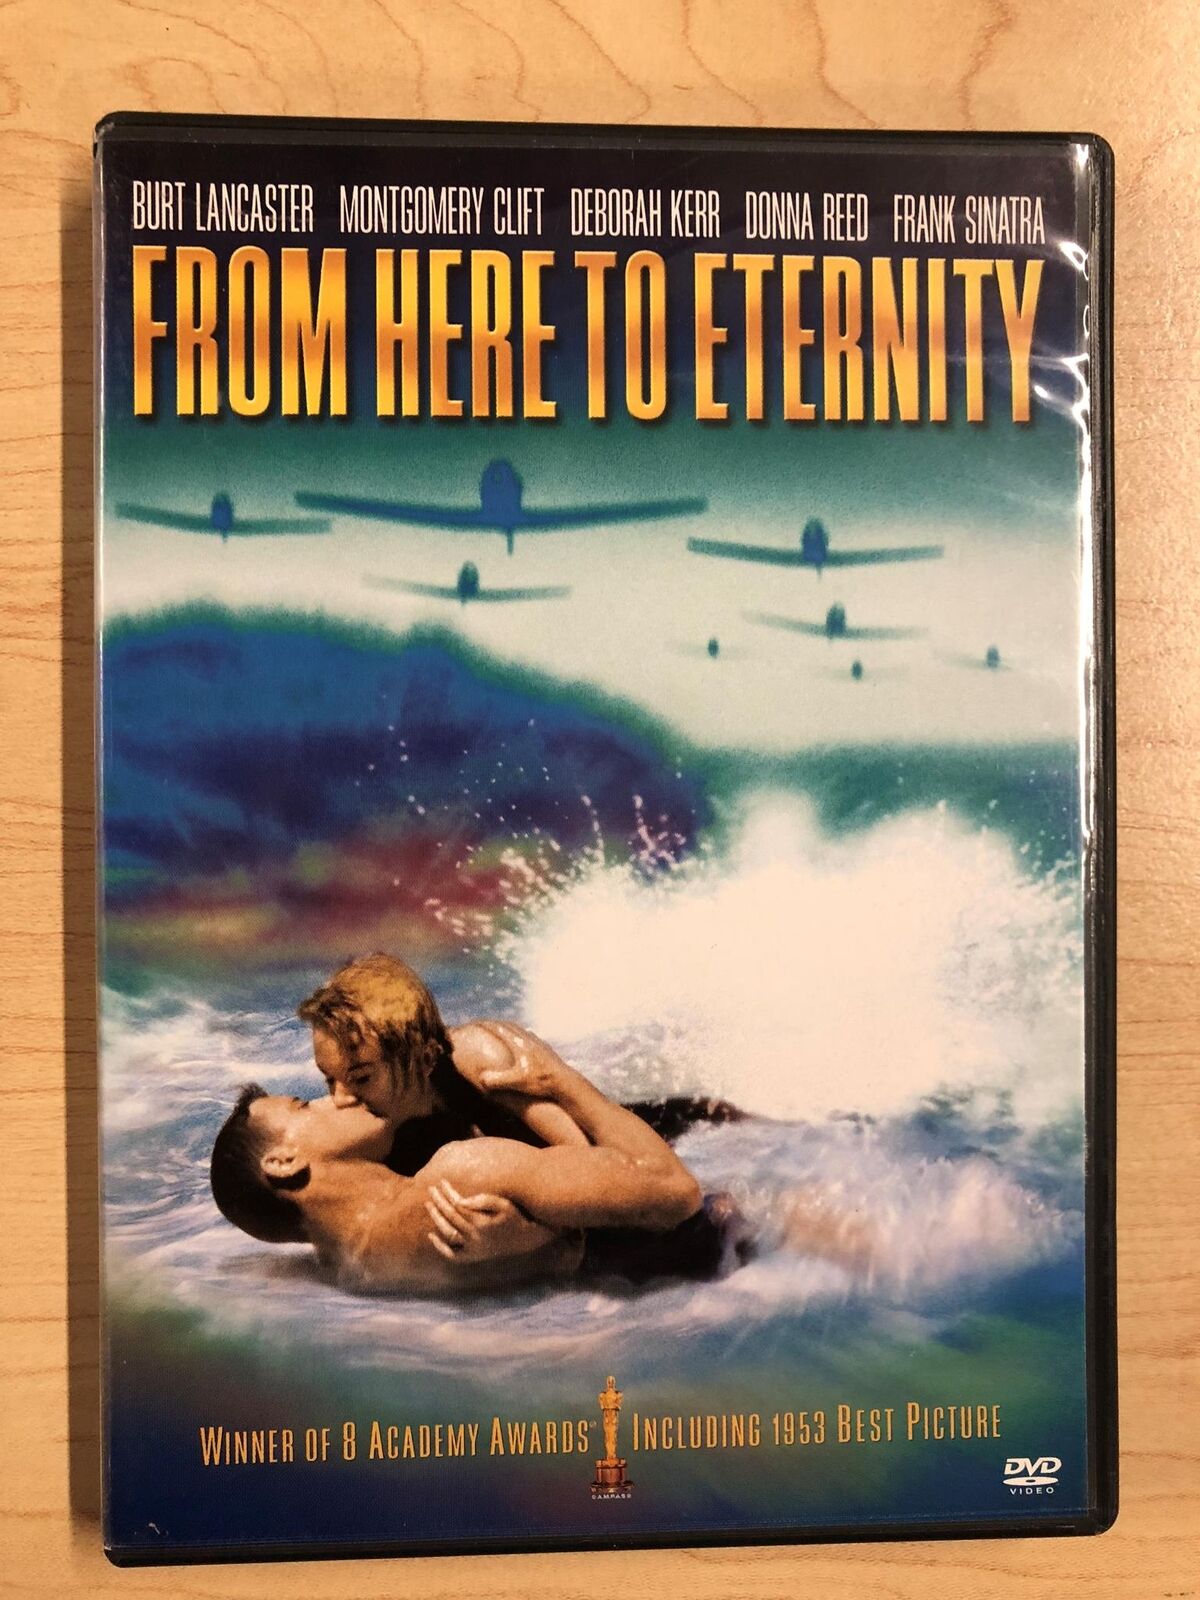 From Here to Eternity (DVD, 1953) - J1105